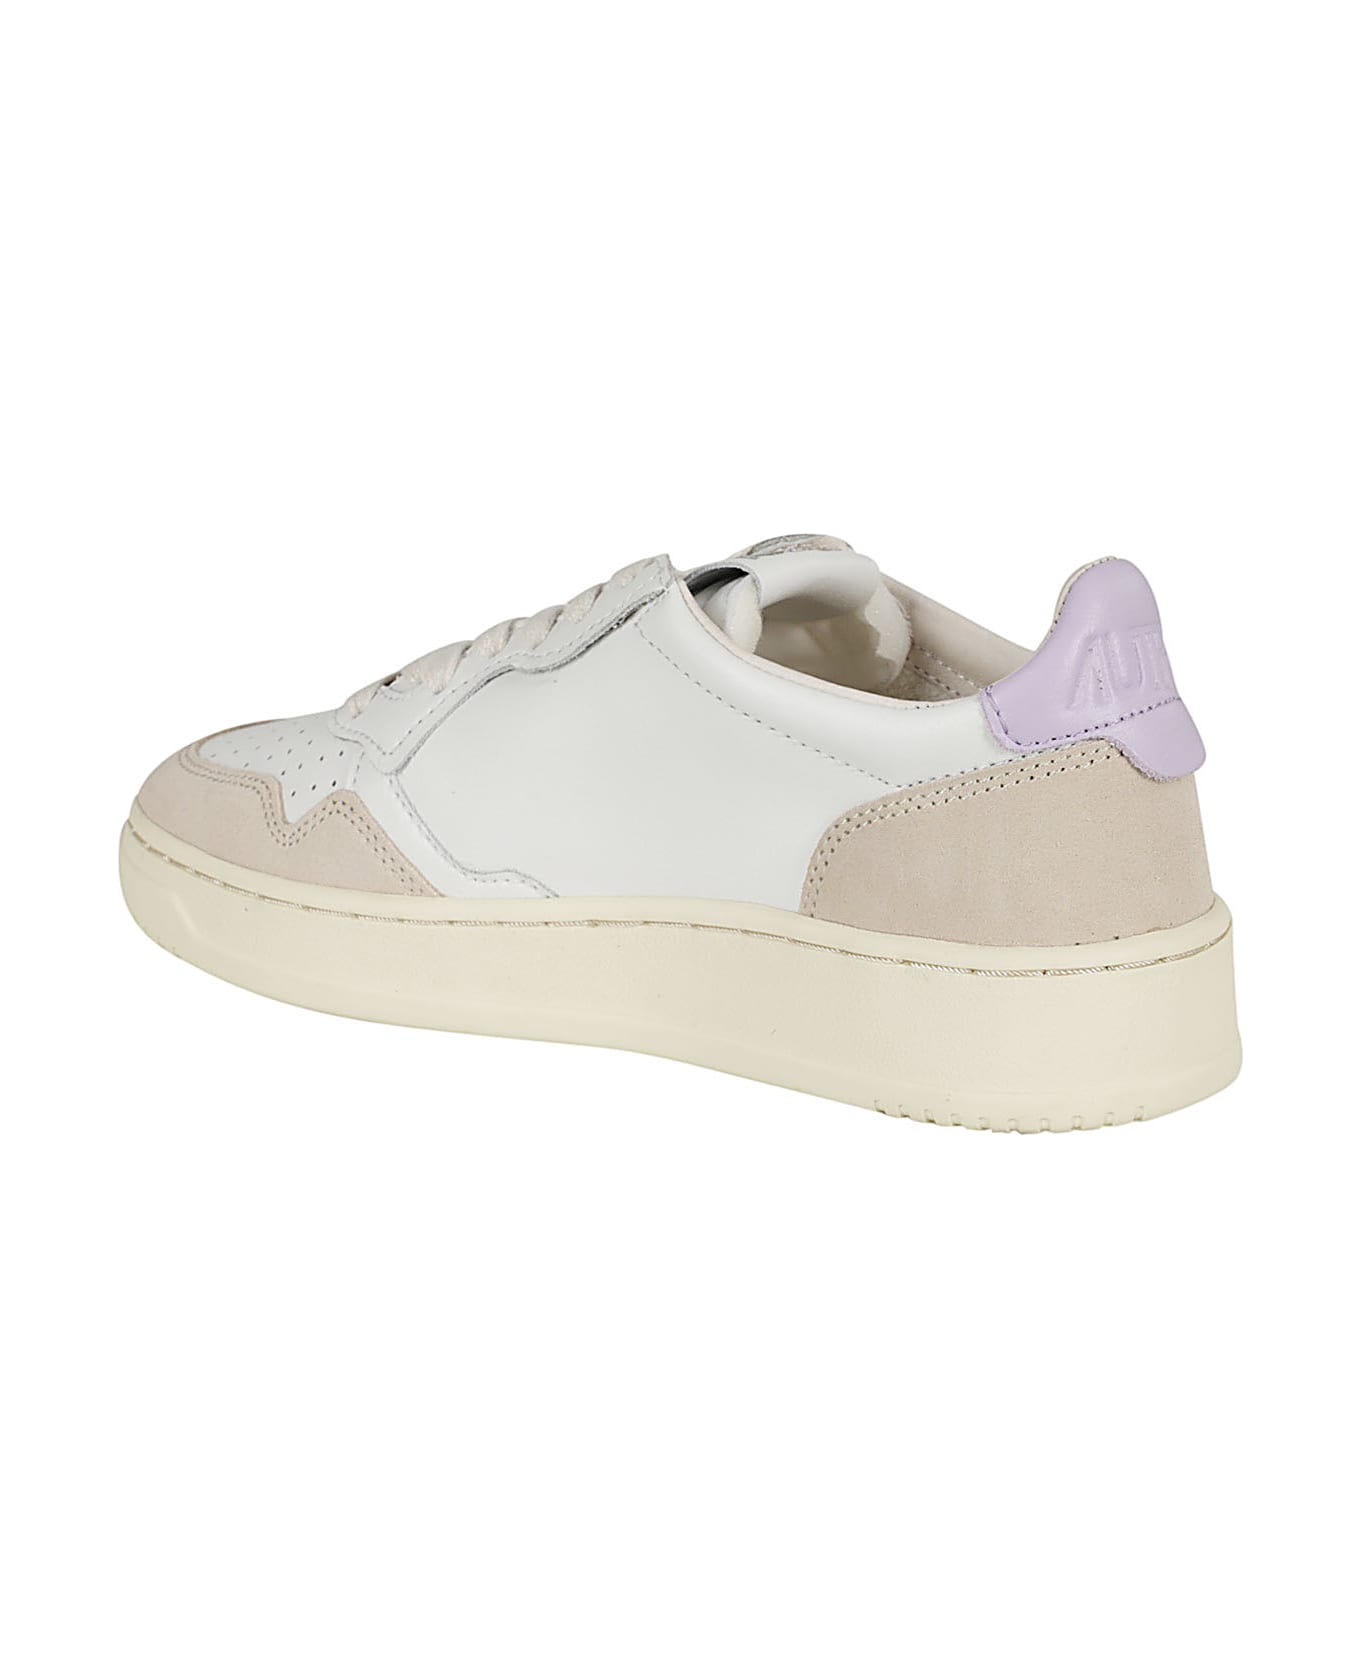 Autry Medalist Low Wom - Suede Lilac